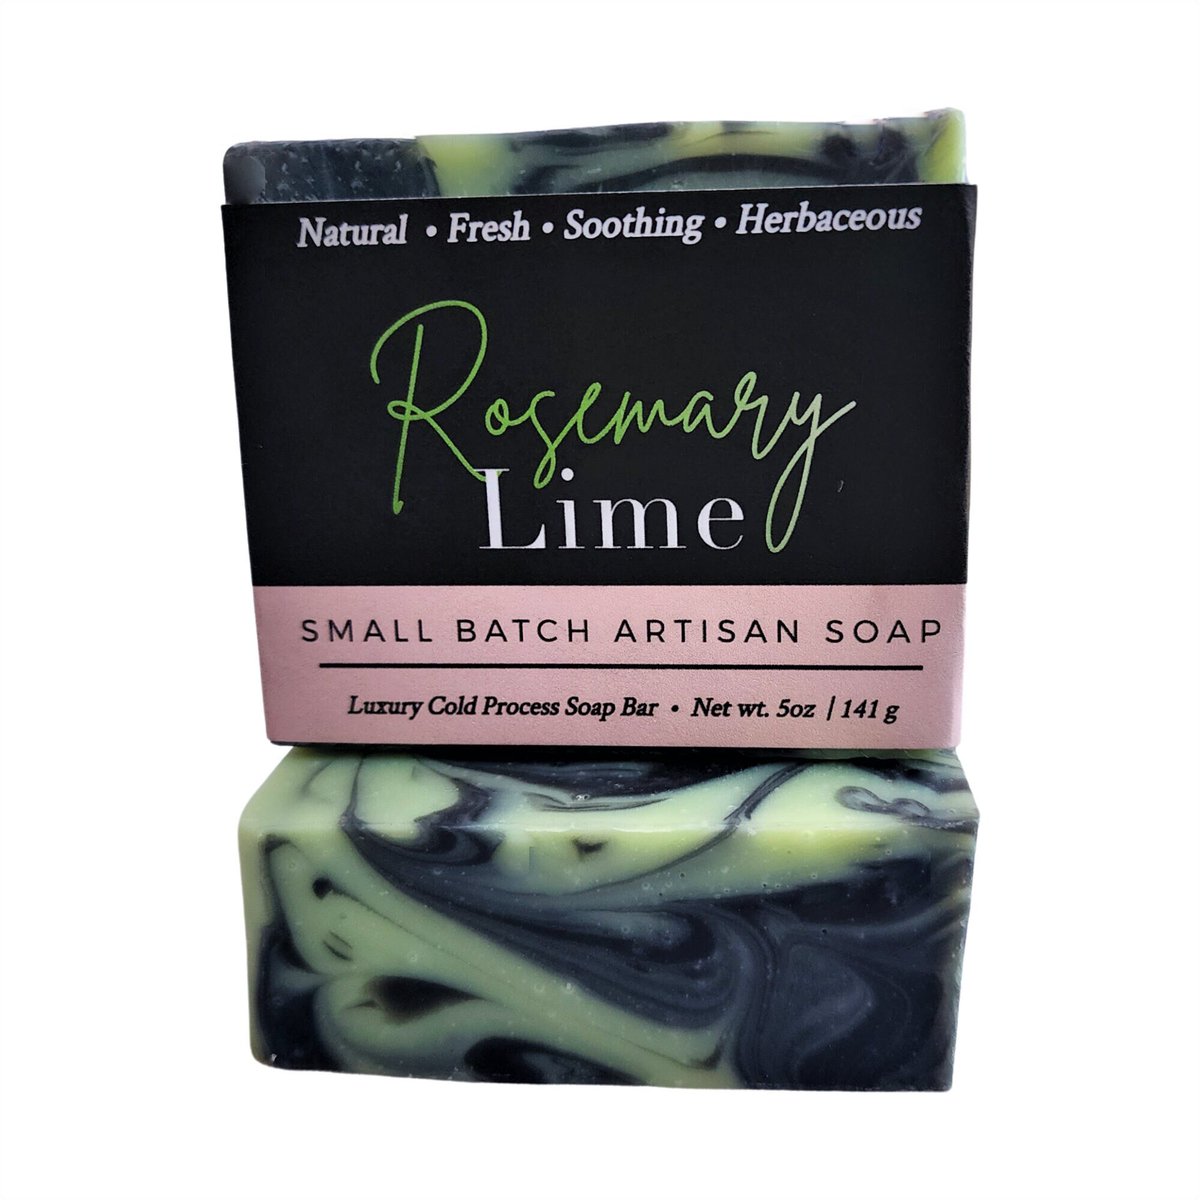 Rosemary Lime Soap, Rosemary Soap, Lime Soap, Natural Soap, Vegan Soap, Cold Process Soap, Artisan Soap, Soap Gift, Mother's Day Gift tuppu.net/bb09a28d #gifts #handmadesoap #shopsmall #Soapgift #vegan #selfcare #DeShawnMarie #Christmasgifts #RosemarySoap